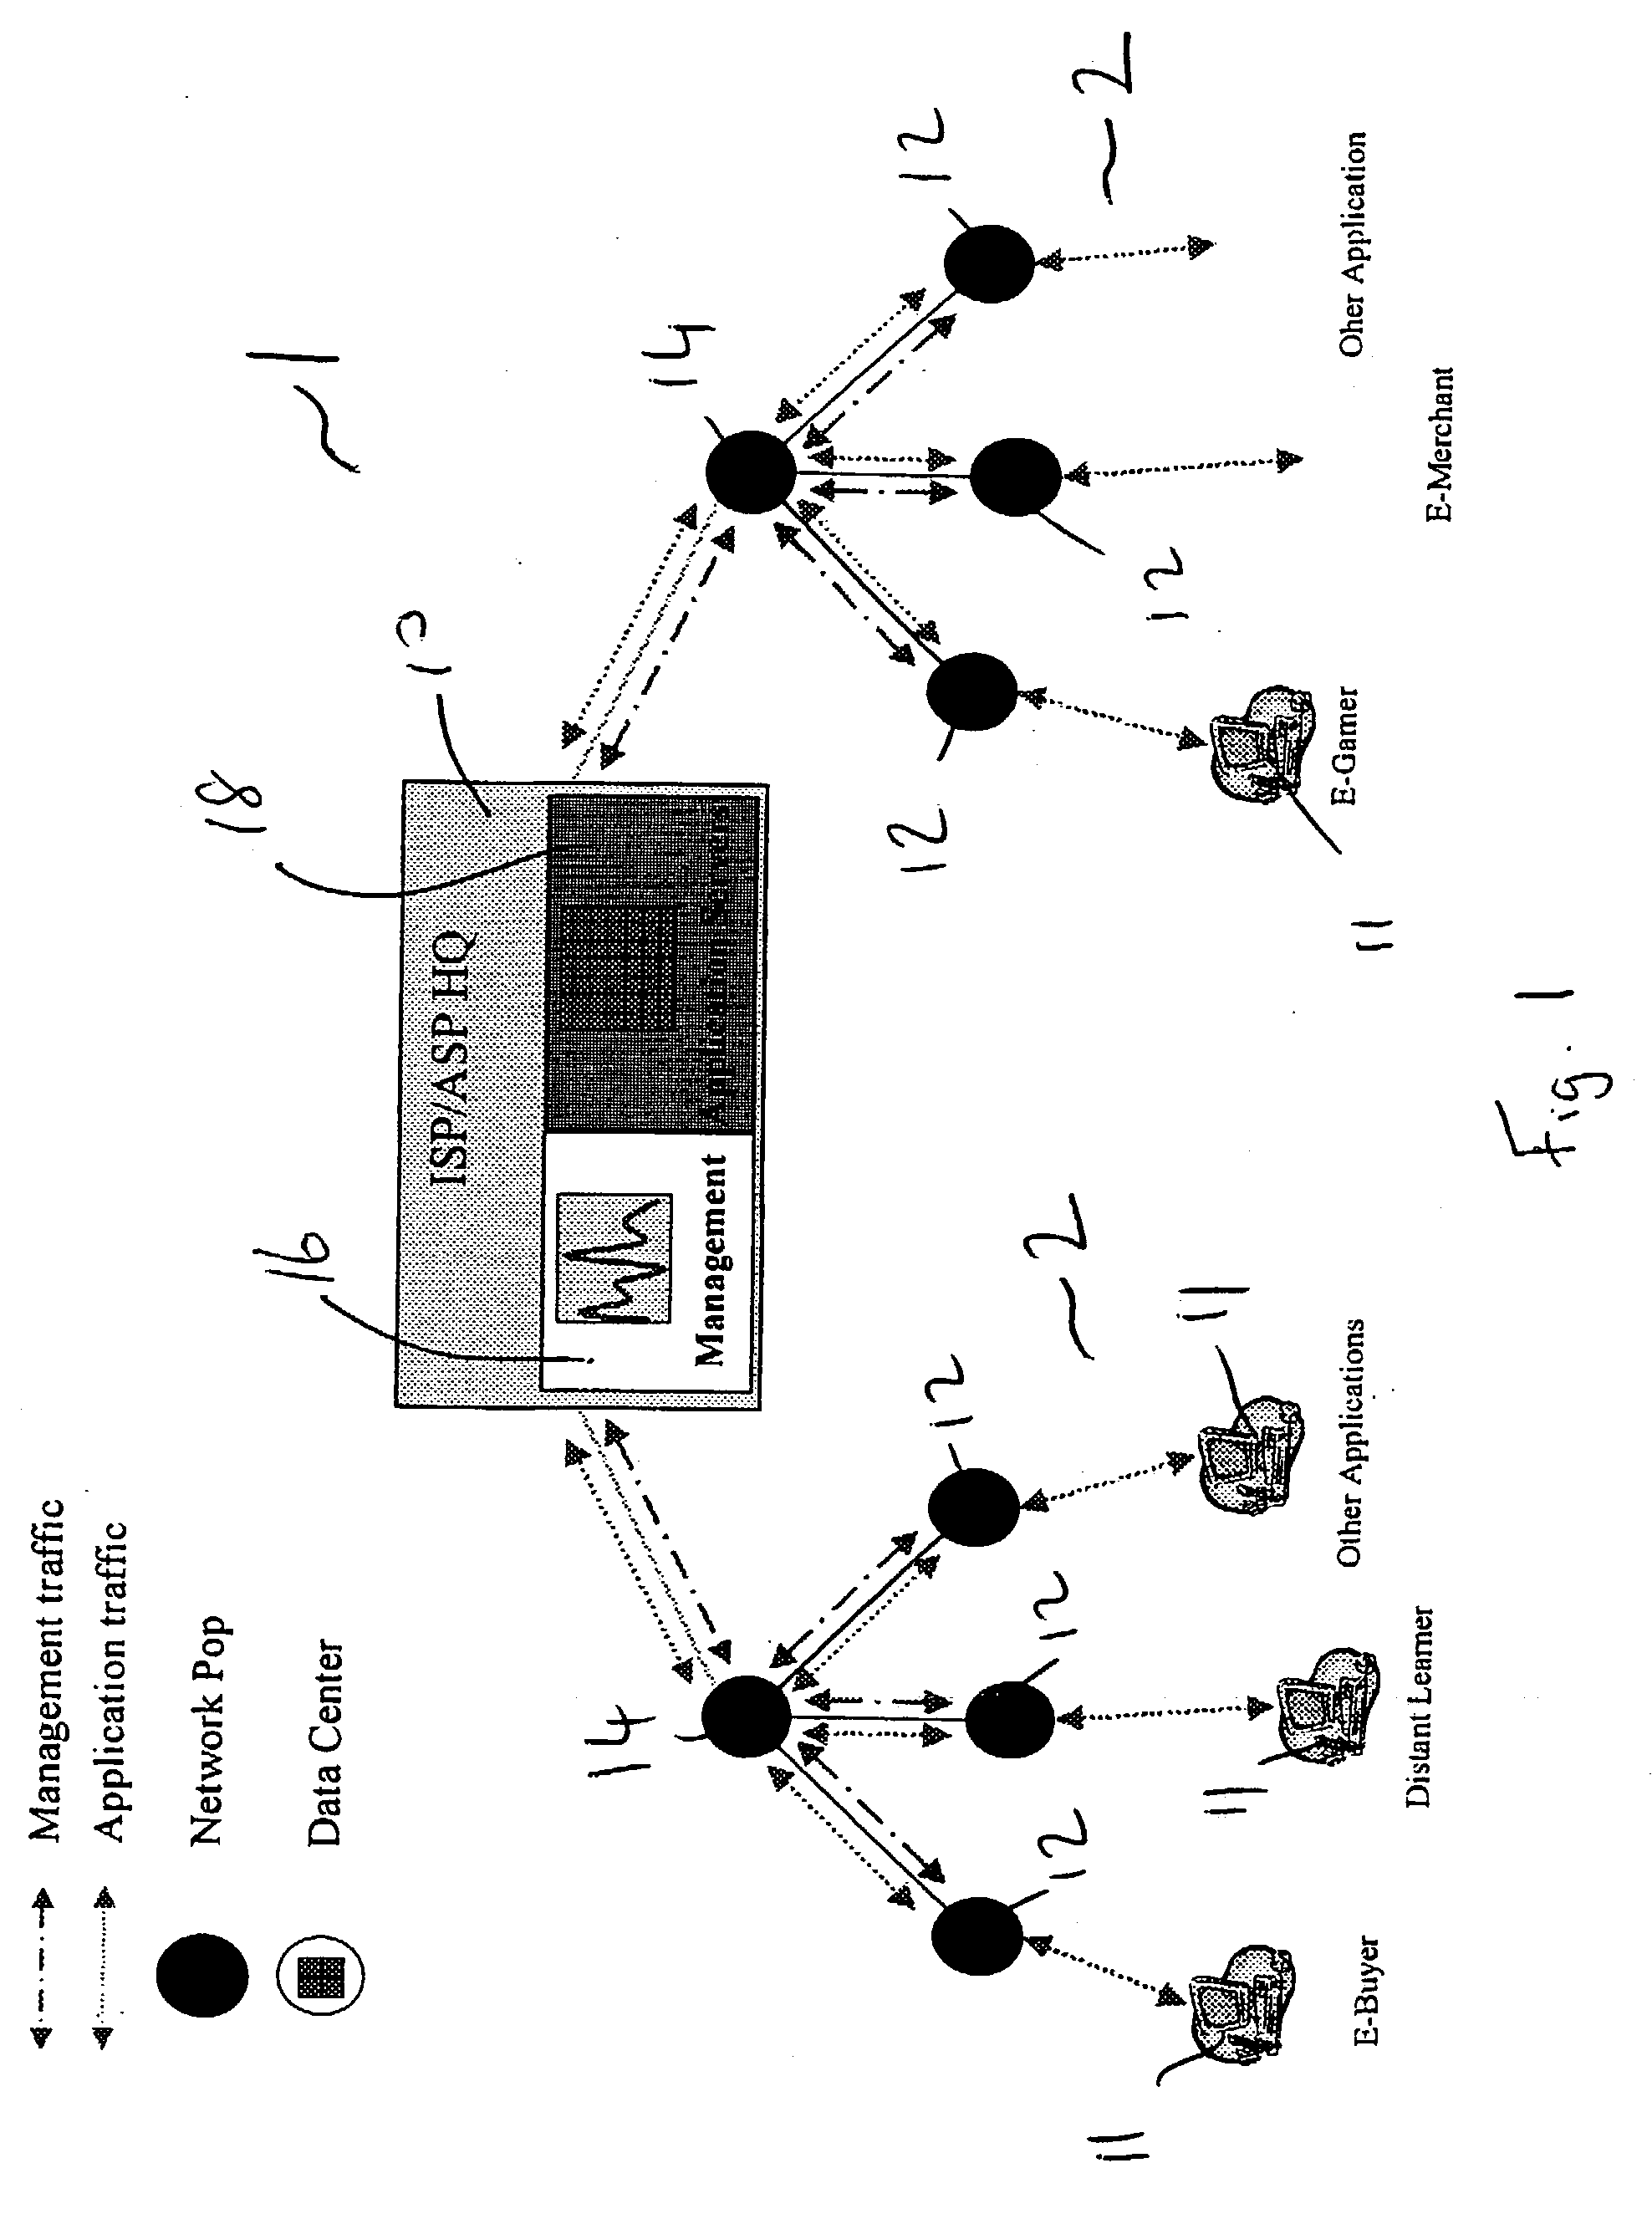 Server module and a distributed server-based internet access scheme and method of operating the same